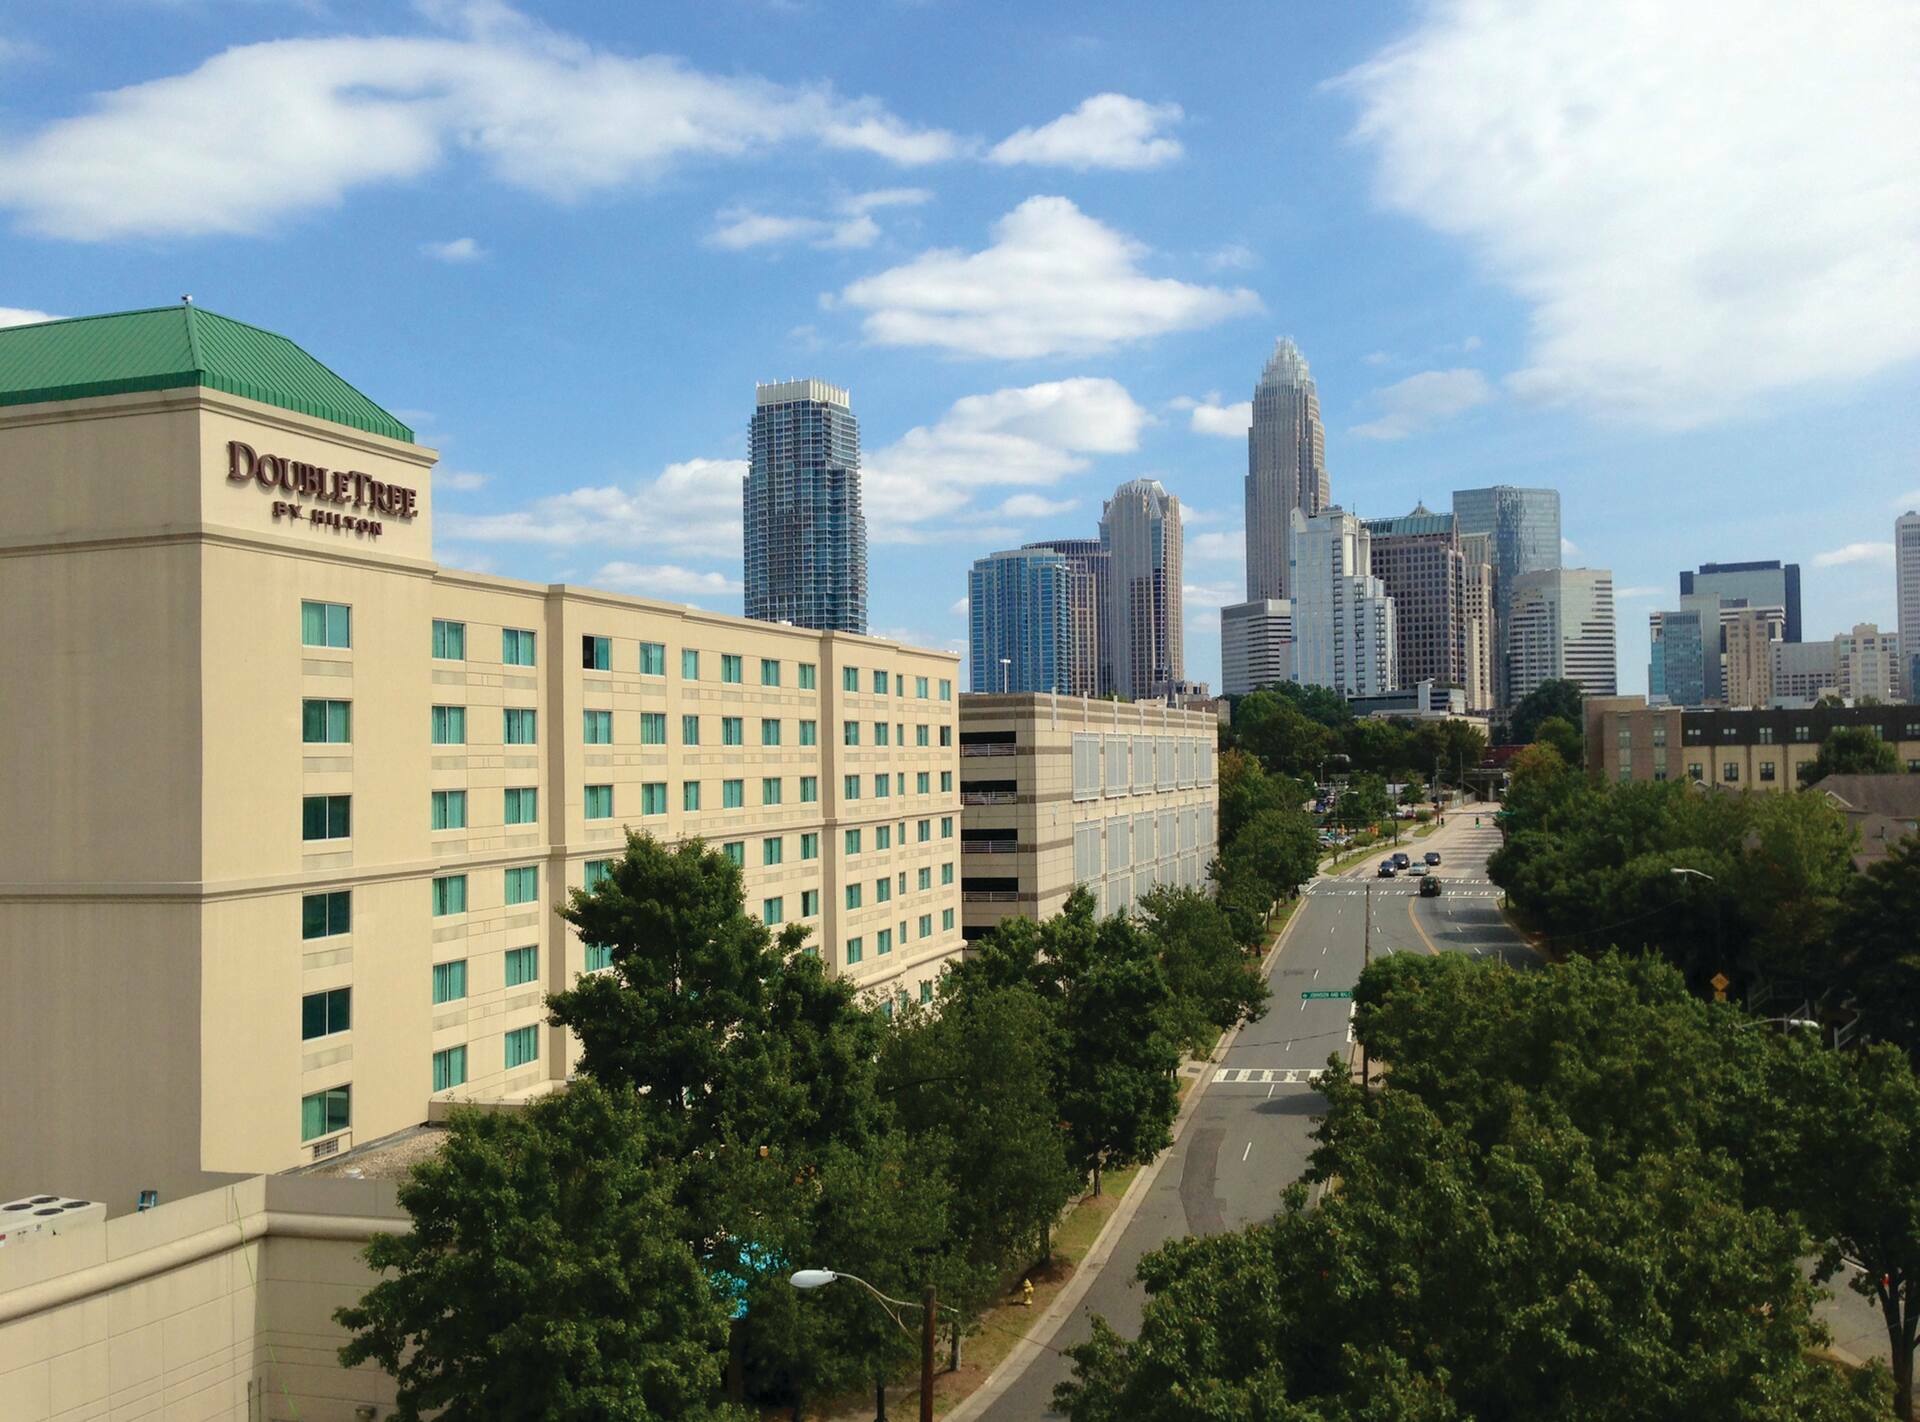 Photo of DoubleTree by Hilton Charlotte Uptown, Charlotte, NC